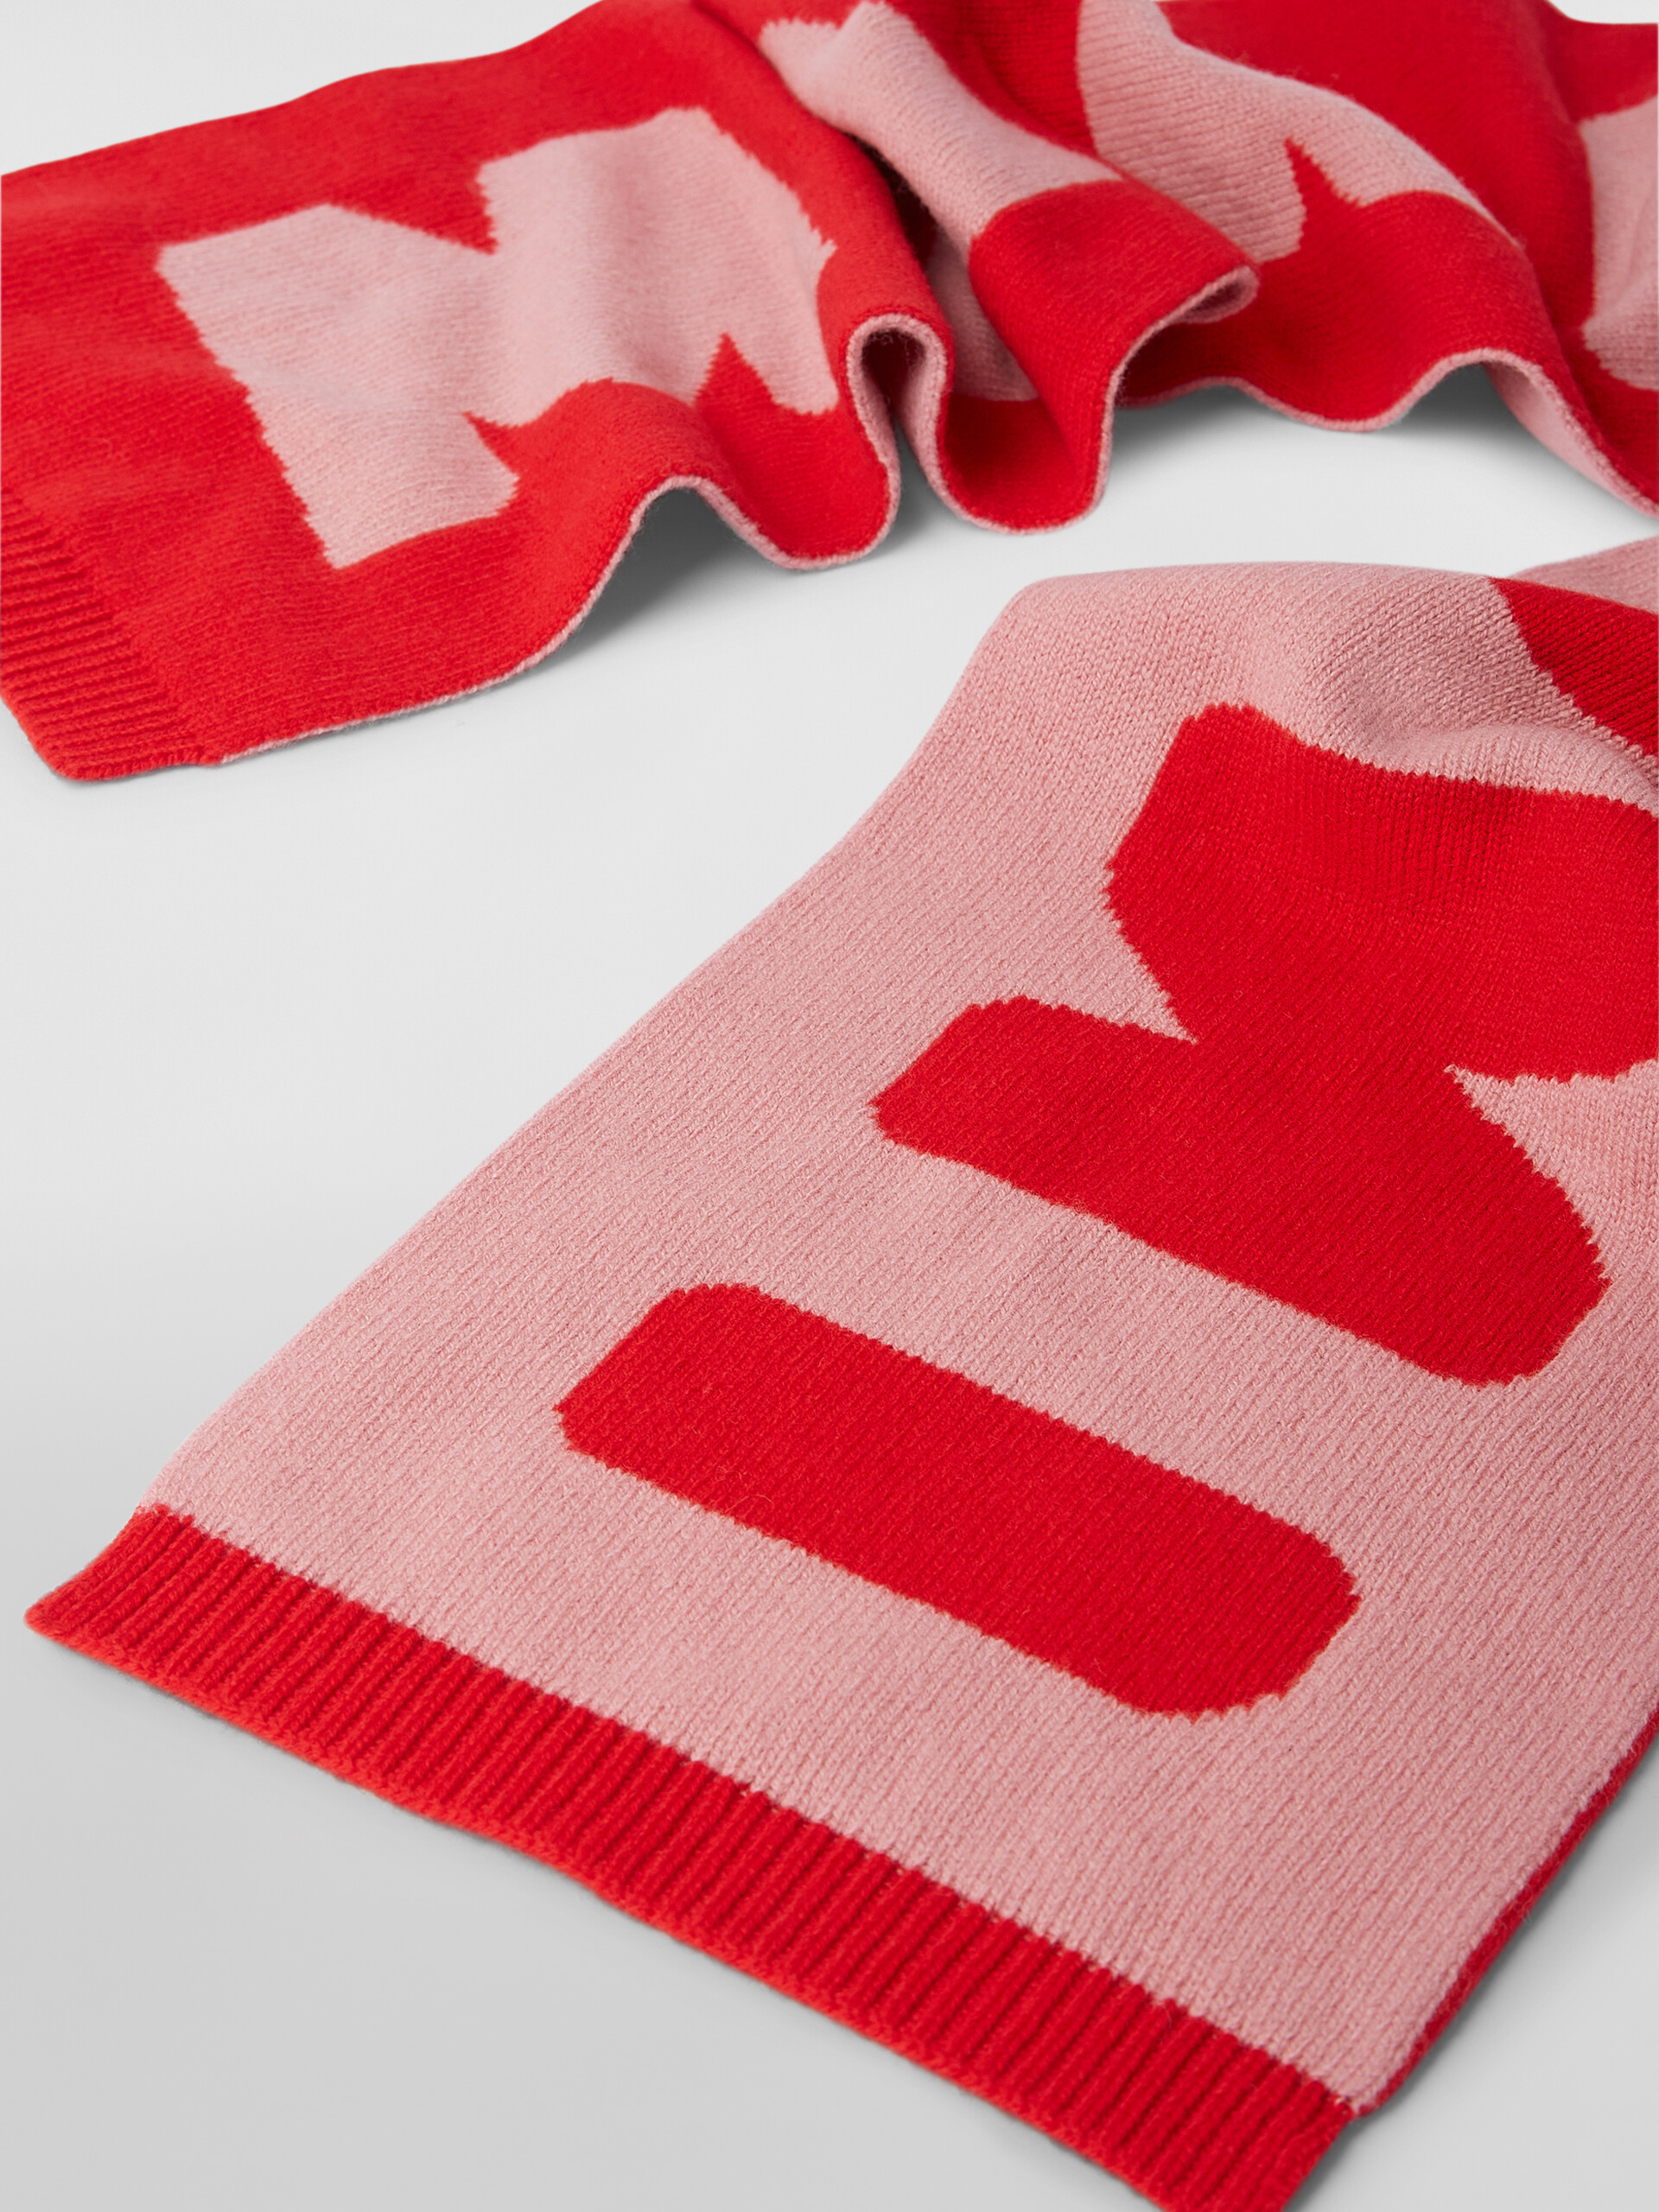 WOOL SCARF WITH MAXI LOGO - Scarves - Image 3